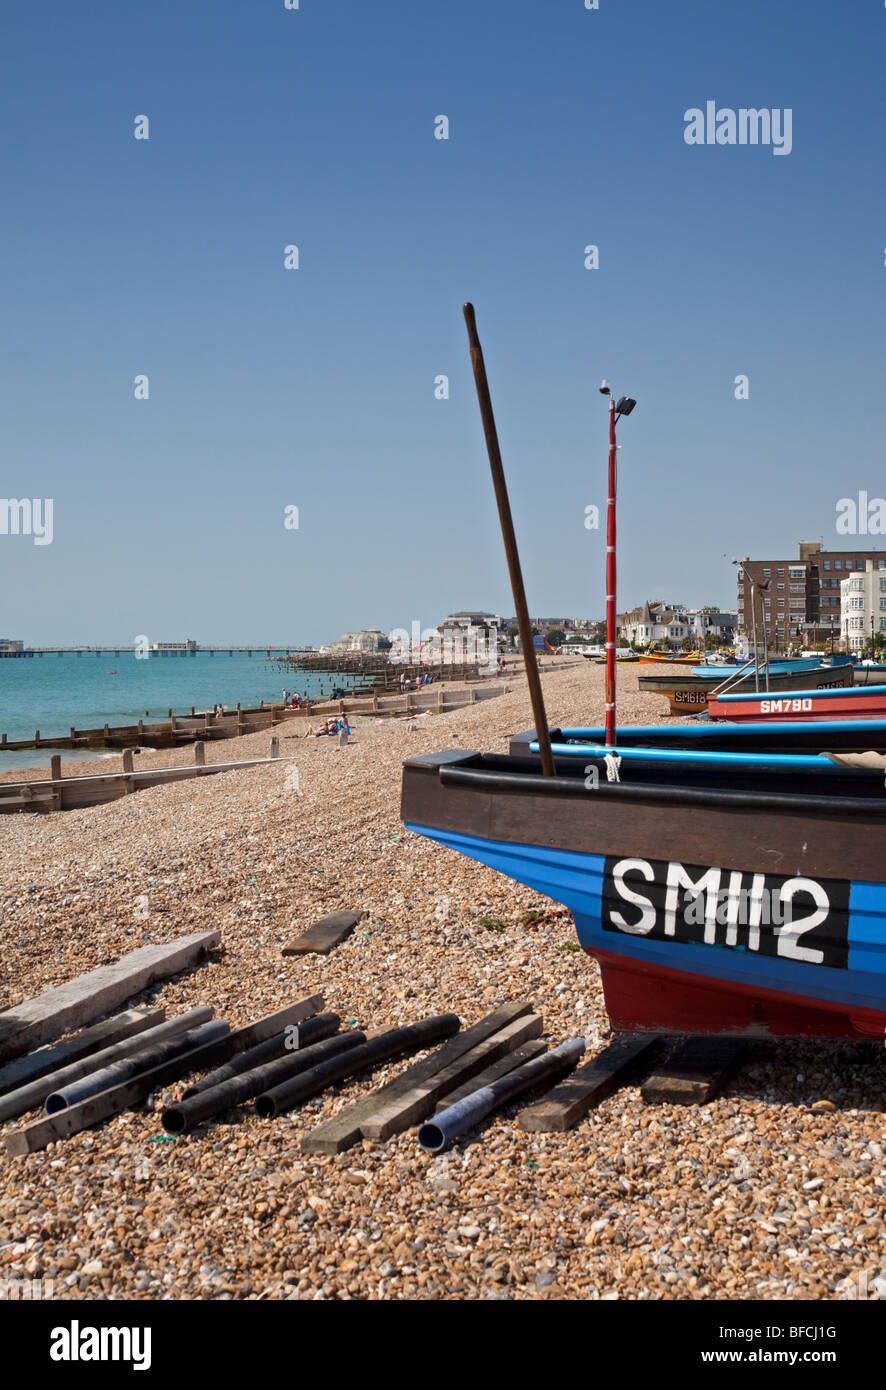 Fishing Boats on Beach at Worthing, West Sussex, England Stock Photo